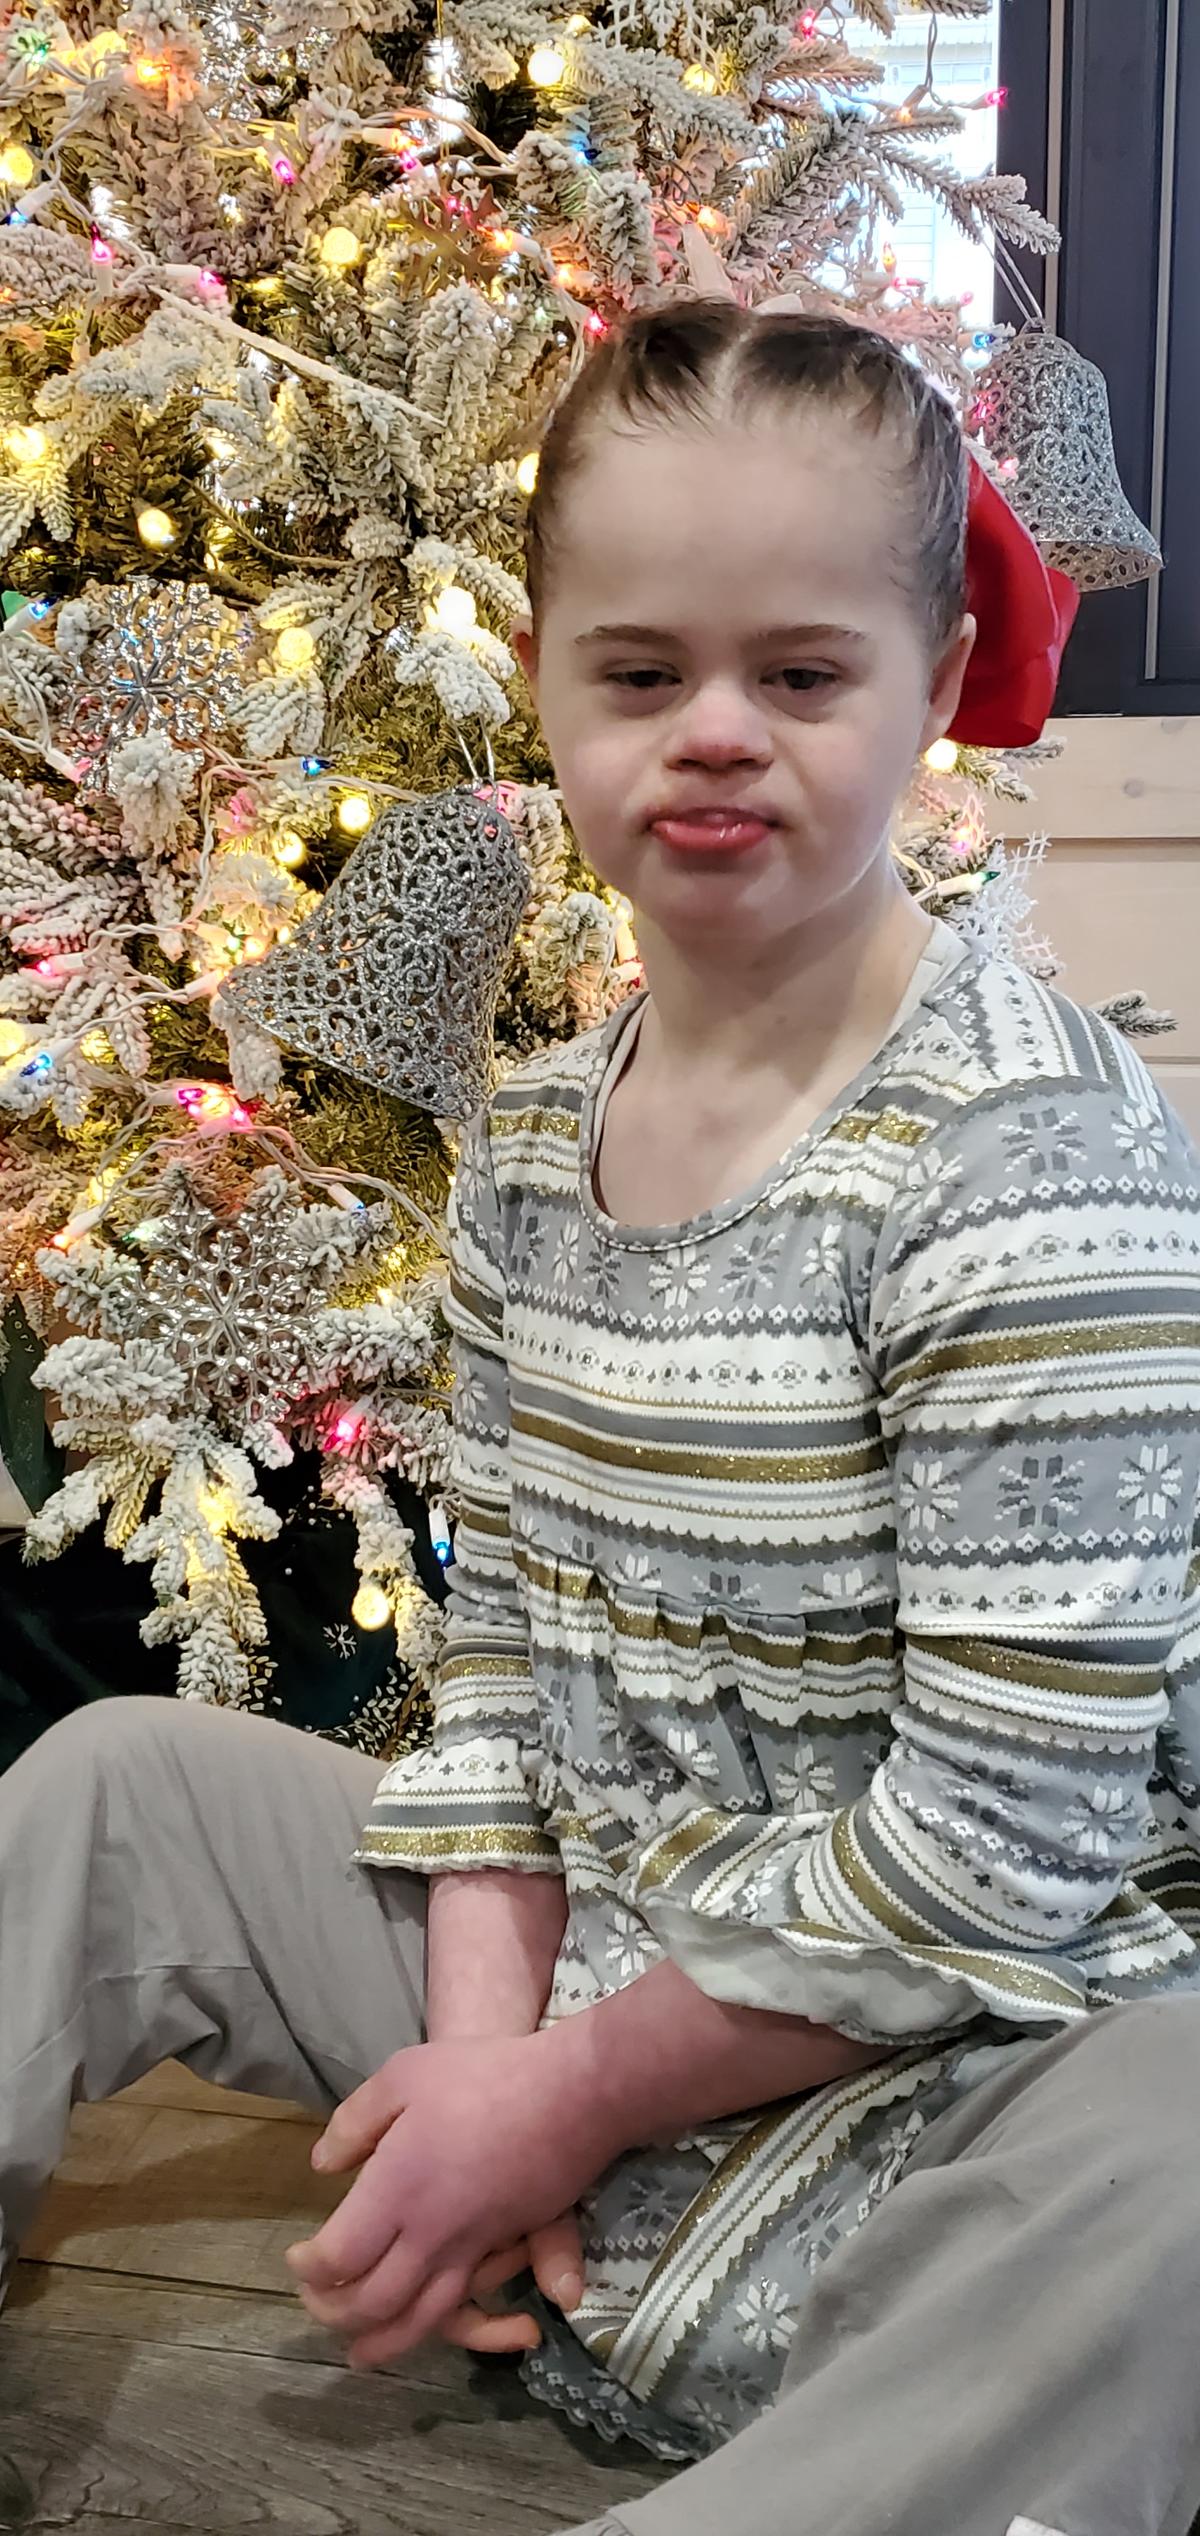 Sarah, a child with Down syndrome, was adopted by Tina's family. (Courtesy of <a href="https://www.facebook.com/robert.t.osborn">Tina Osborn</a>)